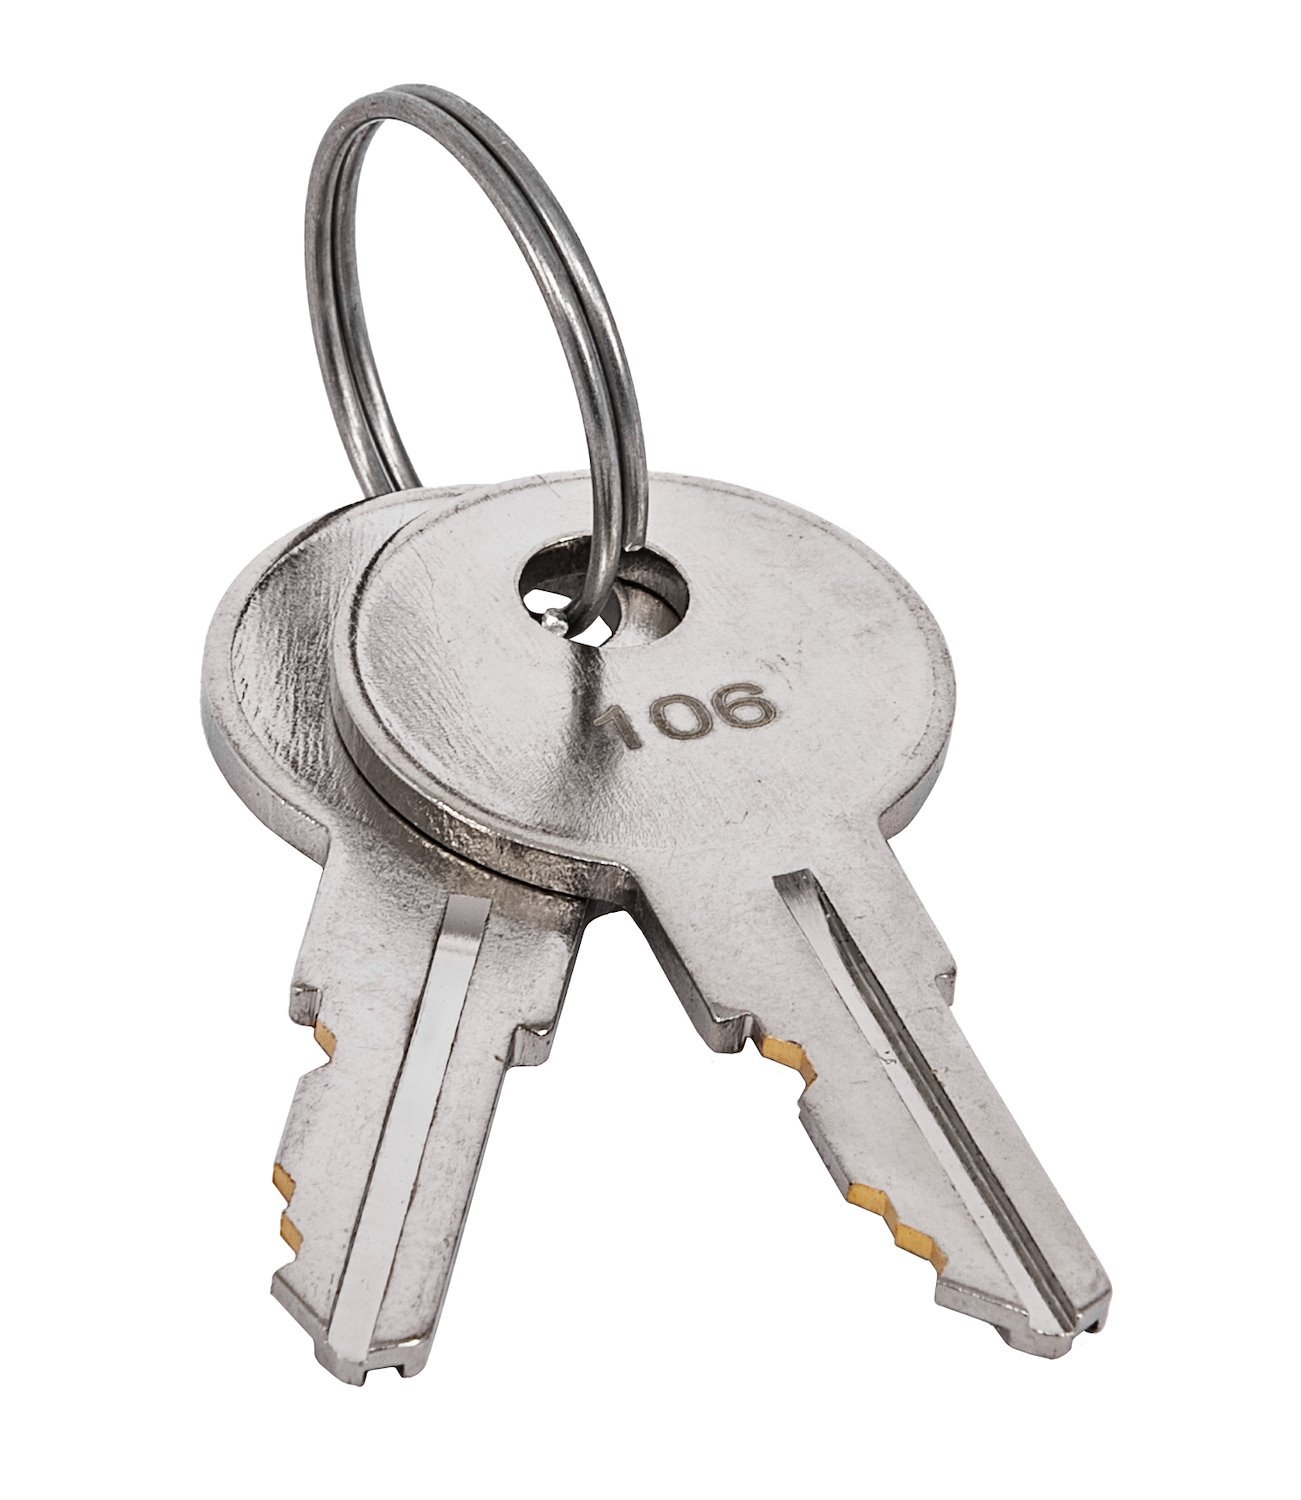 Replacement Keys for JEGS Cargo Carriers (Key Number 106)